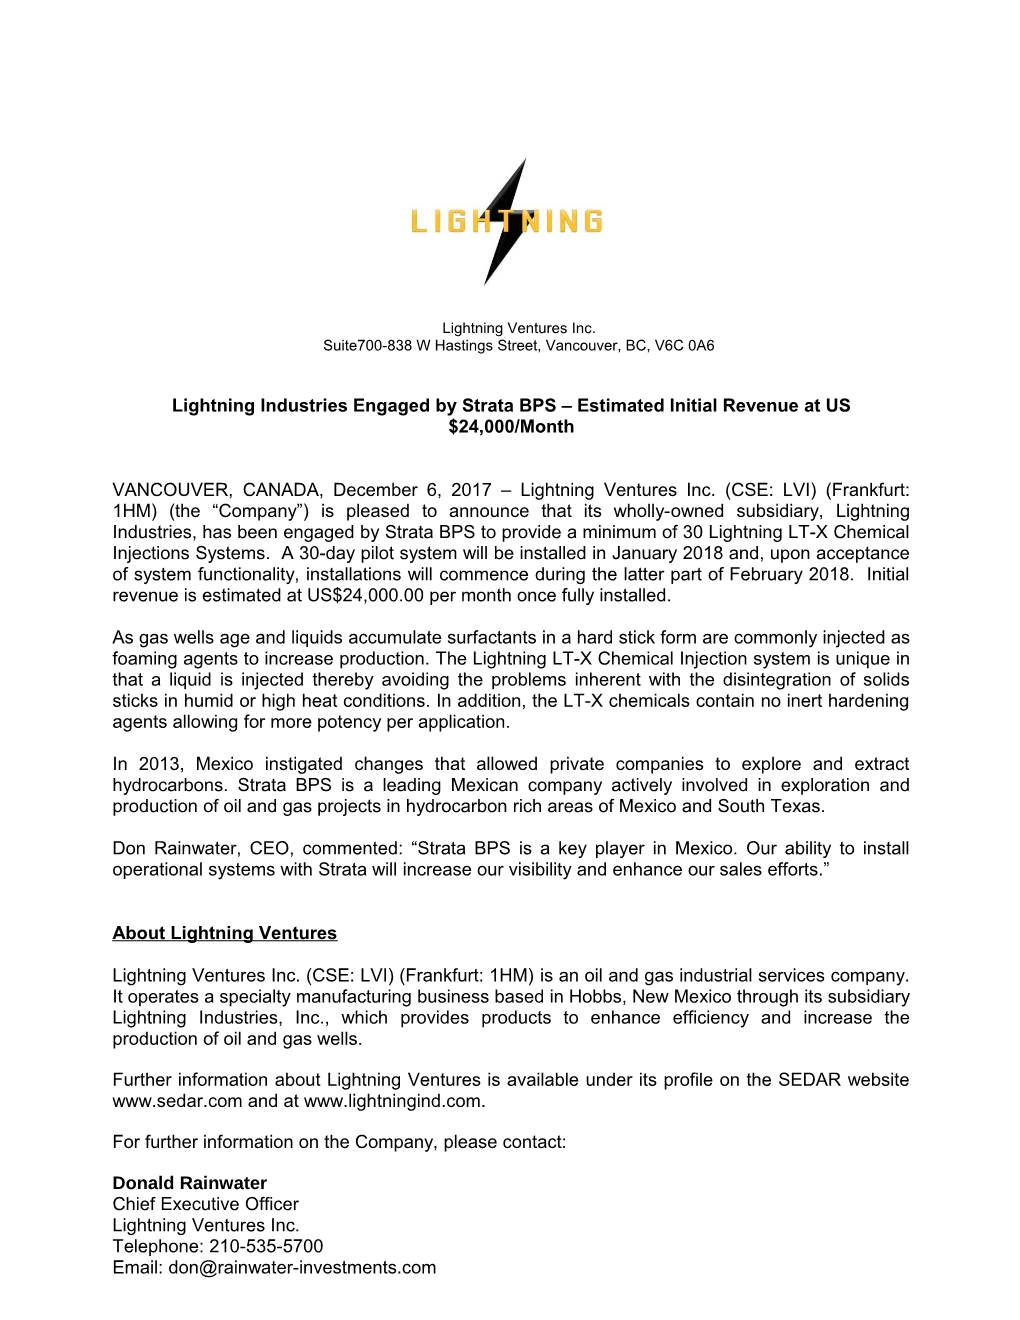 Lightning Industries Engaged by Strata BPS Estimated Initial Revenue at US $24,000/Month